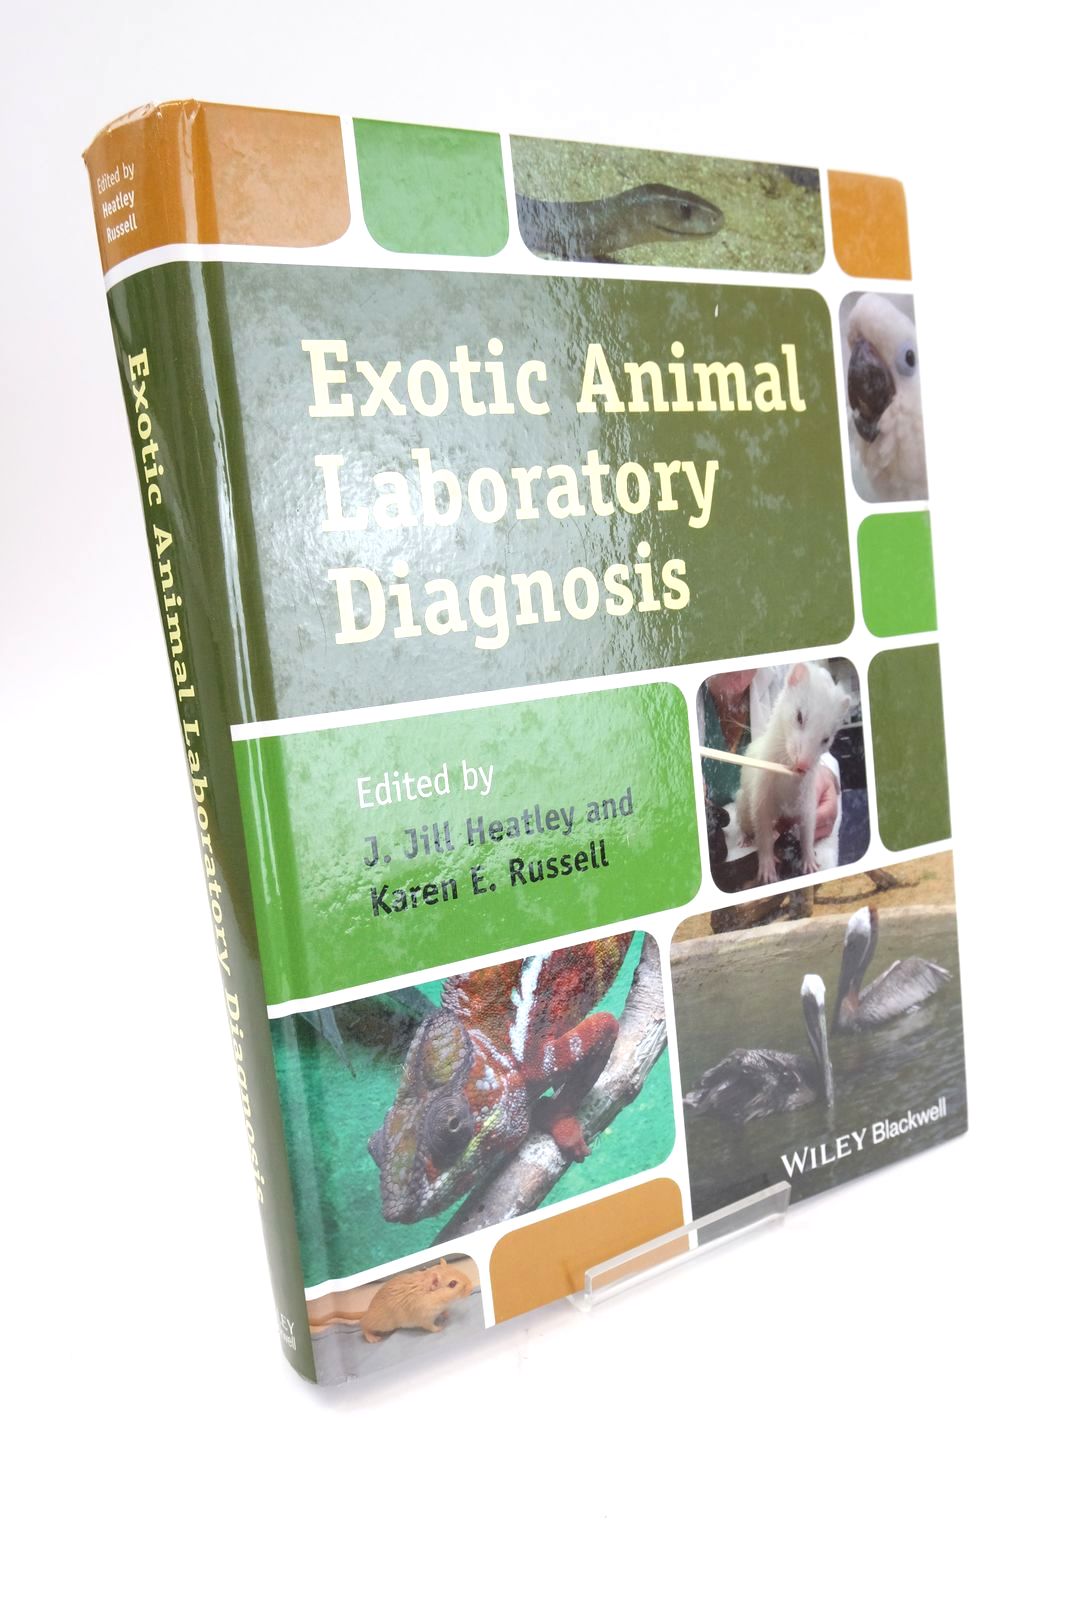 Photo of EXOTIC ANIMAL LABORATORY DIAGNOSIS written by Heatley, J. Jill Russell, Karen E. published by Wiley-Blackwell (STOCK CODE: 1324941)  for sale by Stella & Rose's Books